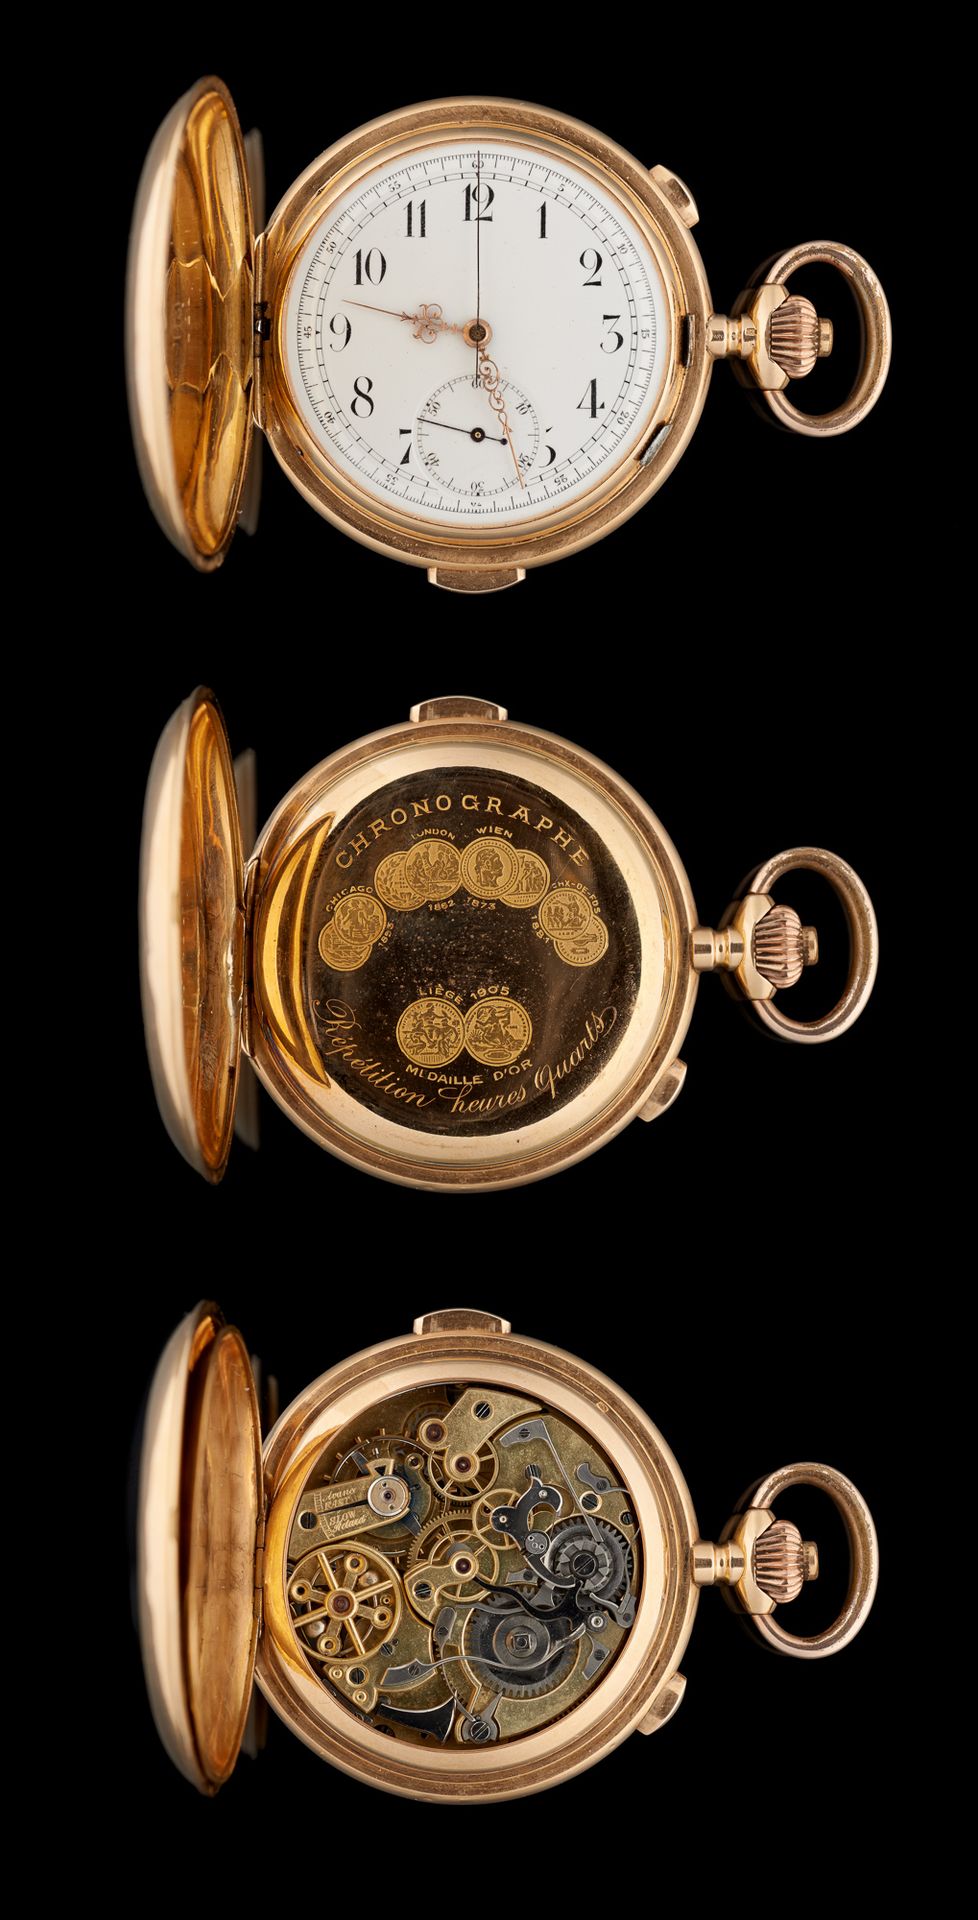 Circa 1900. Watches: Pocket watch in 18 carat gold, chronograph, hour and quarte&hellip;